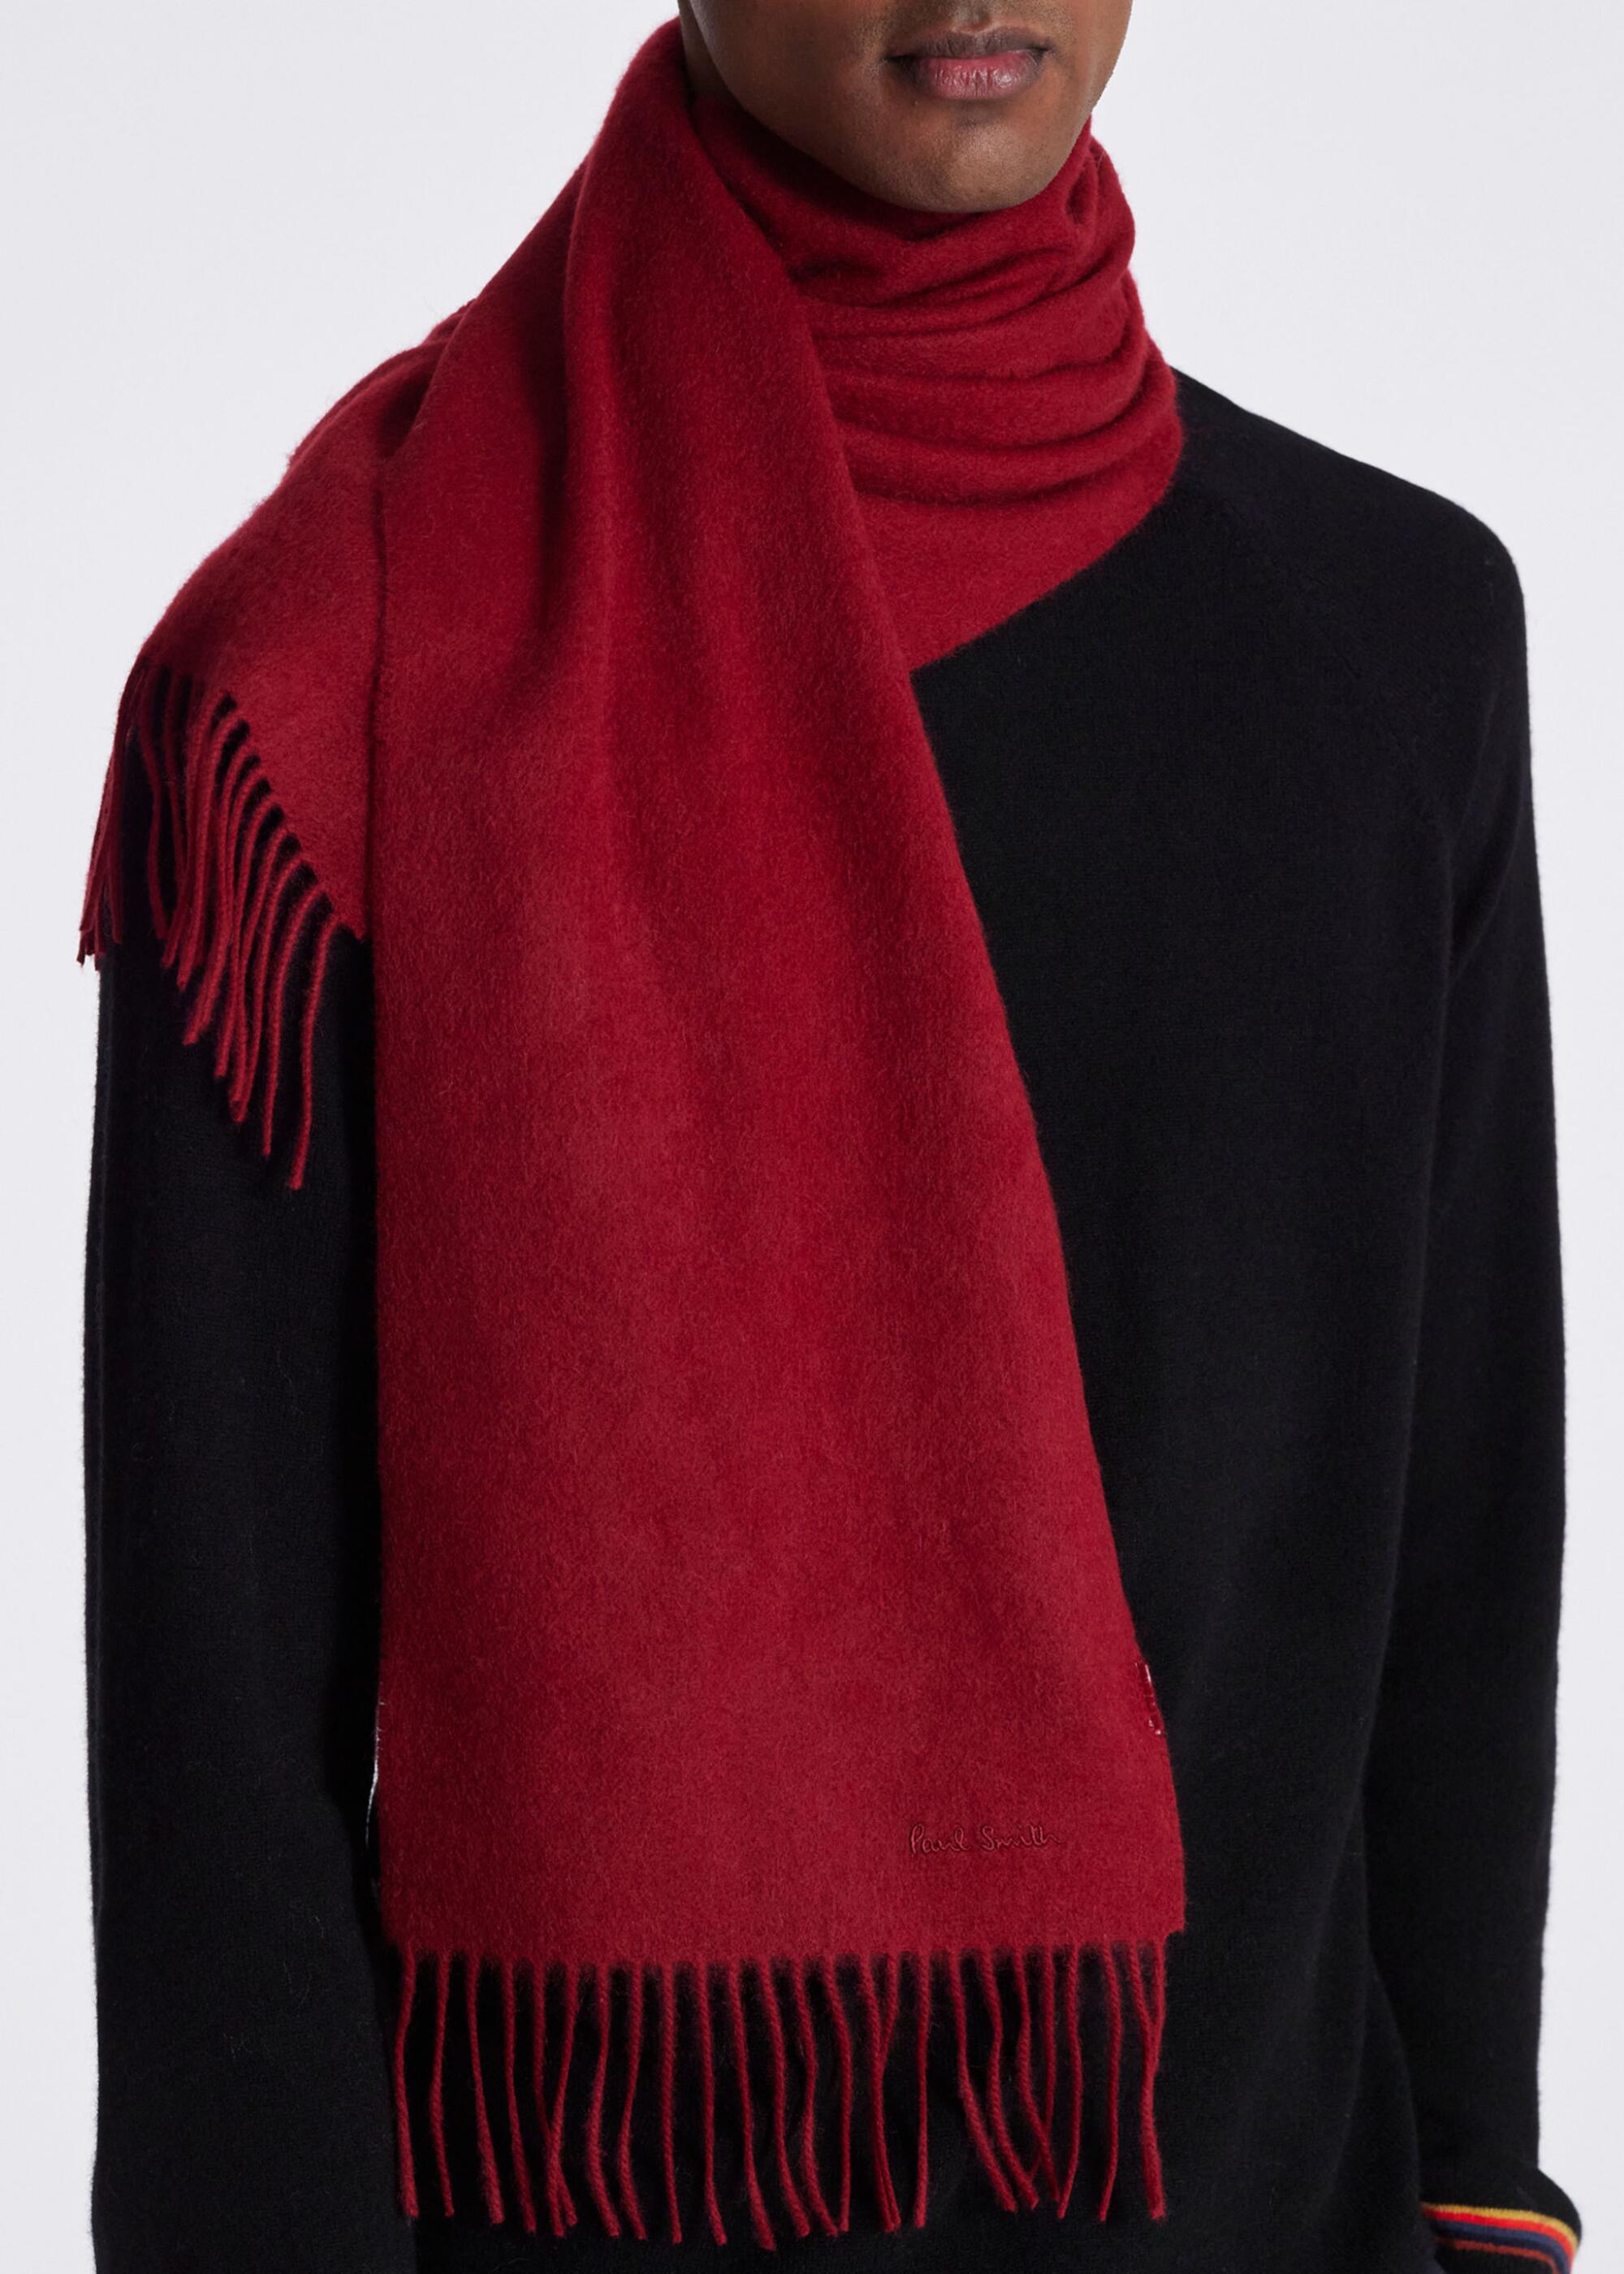 A red cashmere scarf wrapped around a man's neck. 